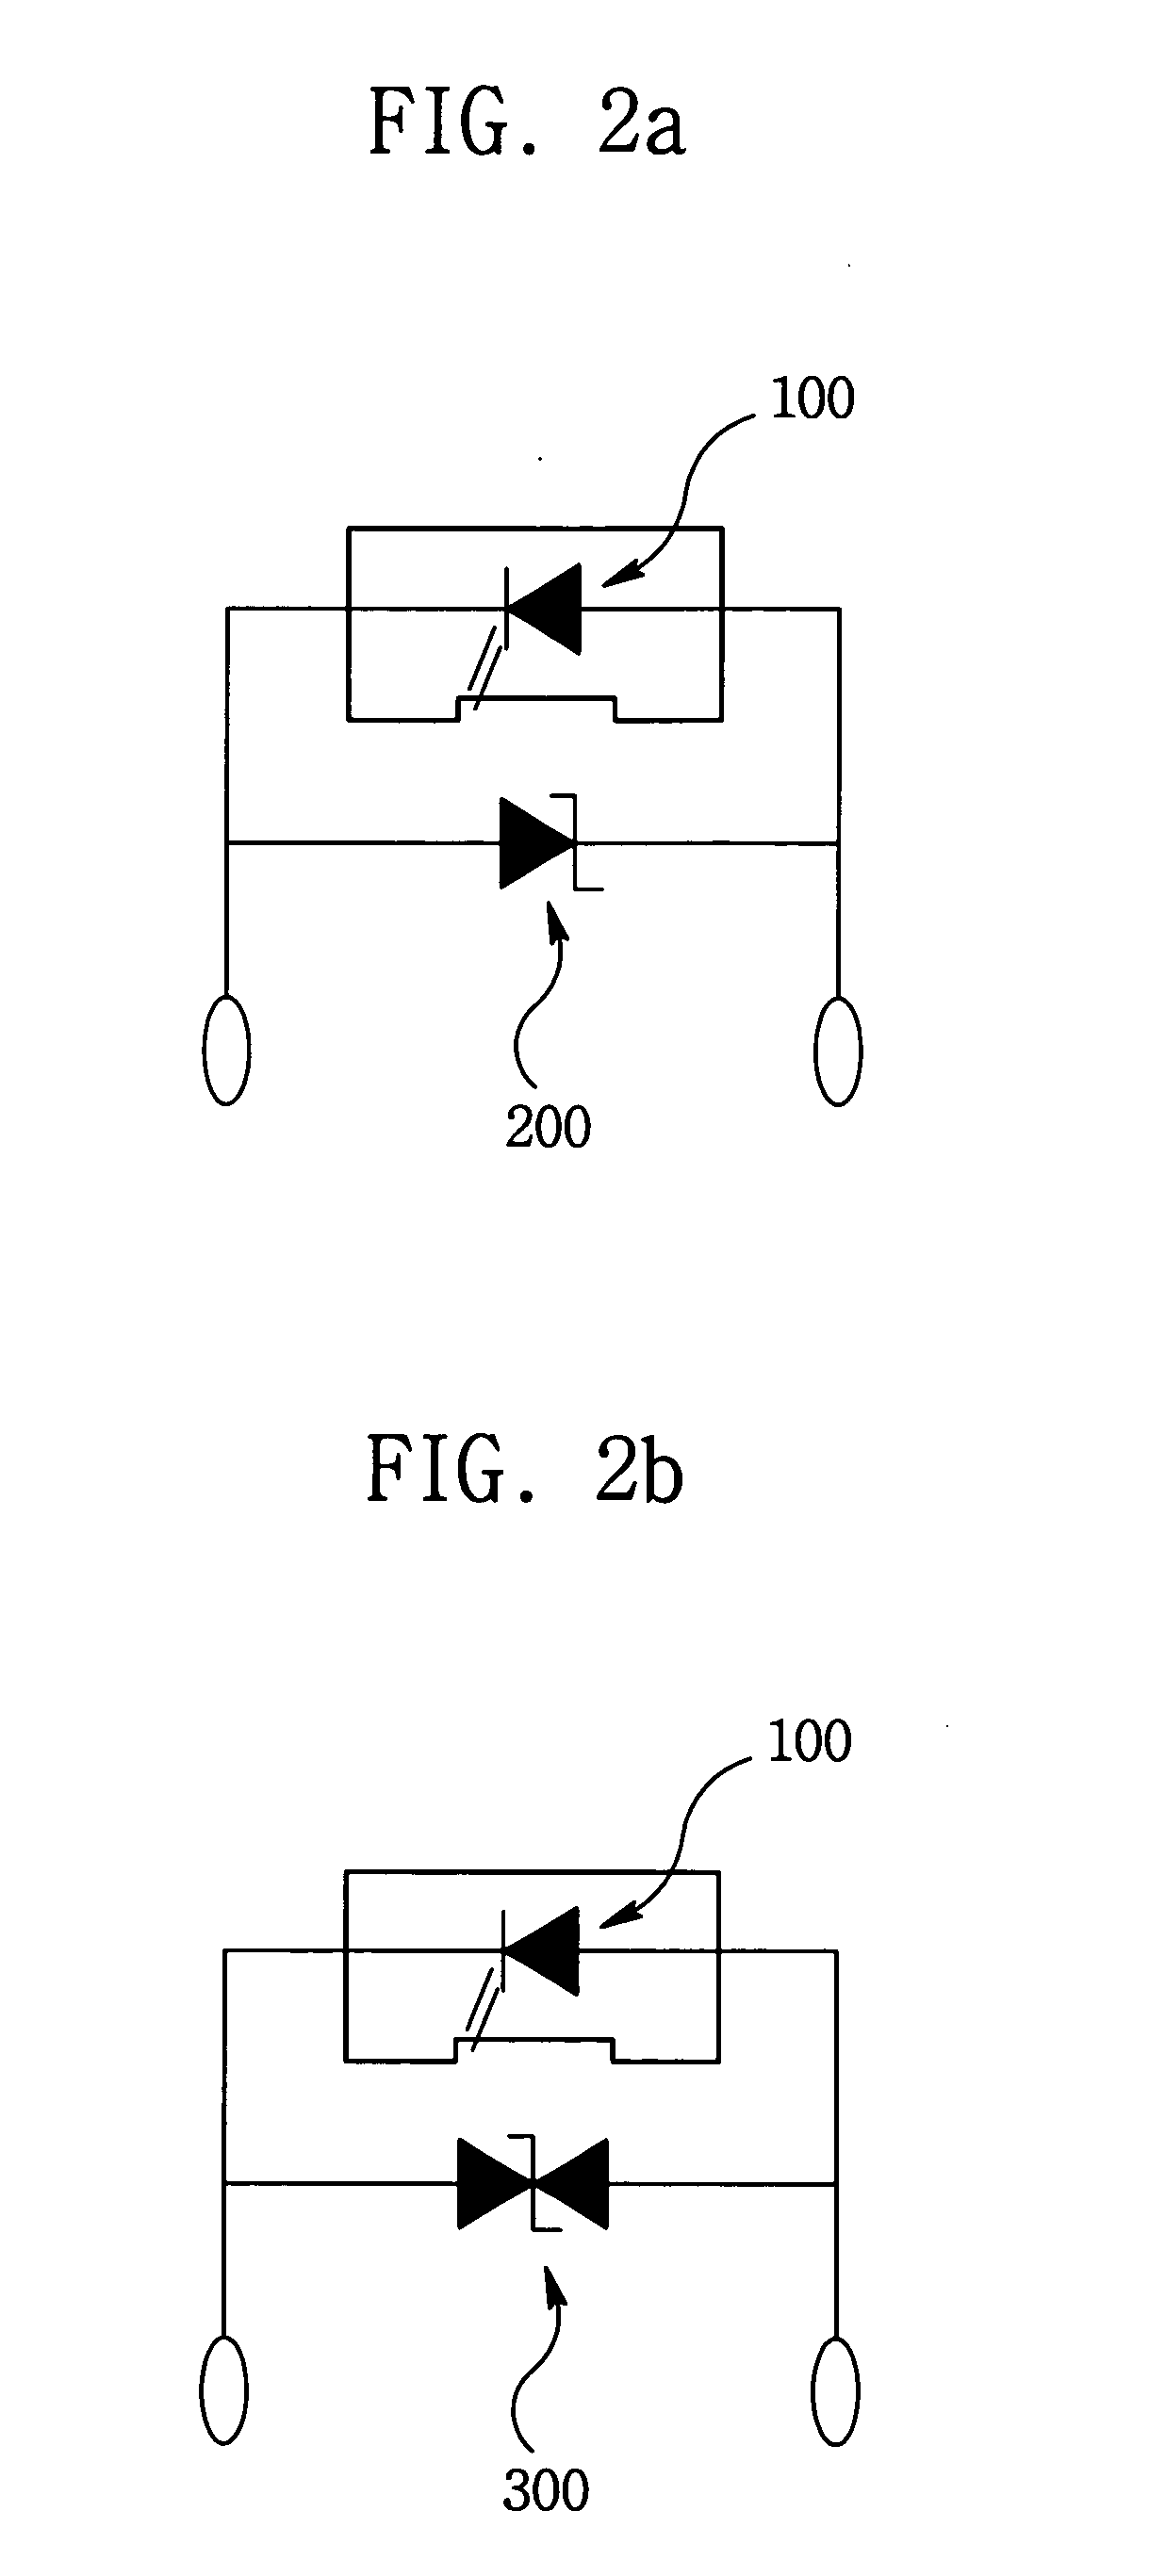 Submount substrate for mounting light emitting device and method of fabricating the same